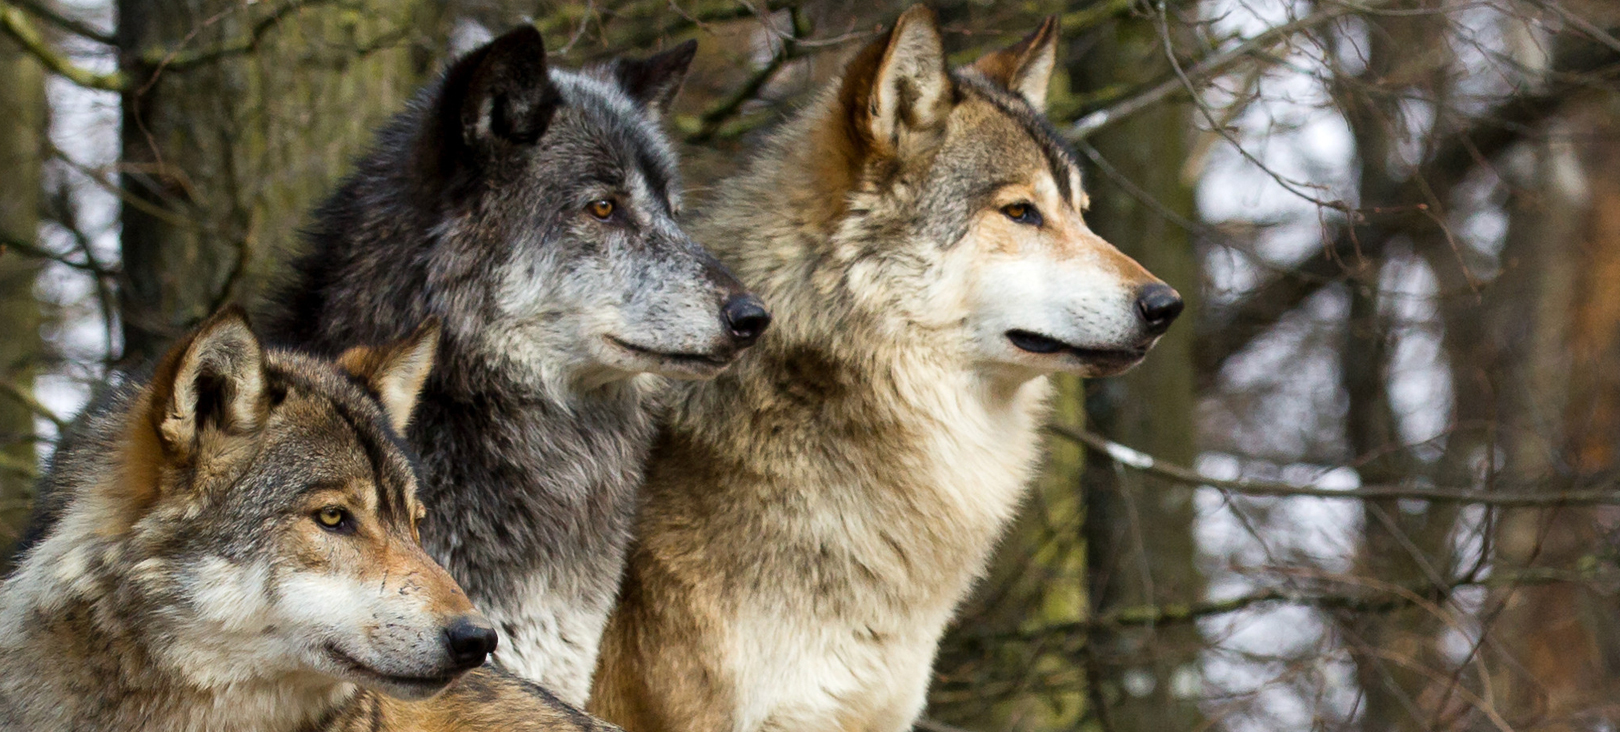 Dog and the Wolf: Similarities and Differences and the Impact of Evolution on Nutritional Needs